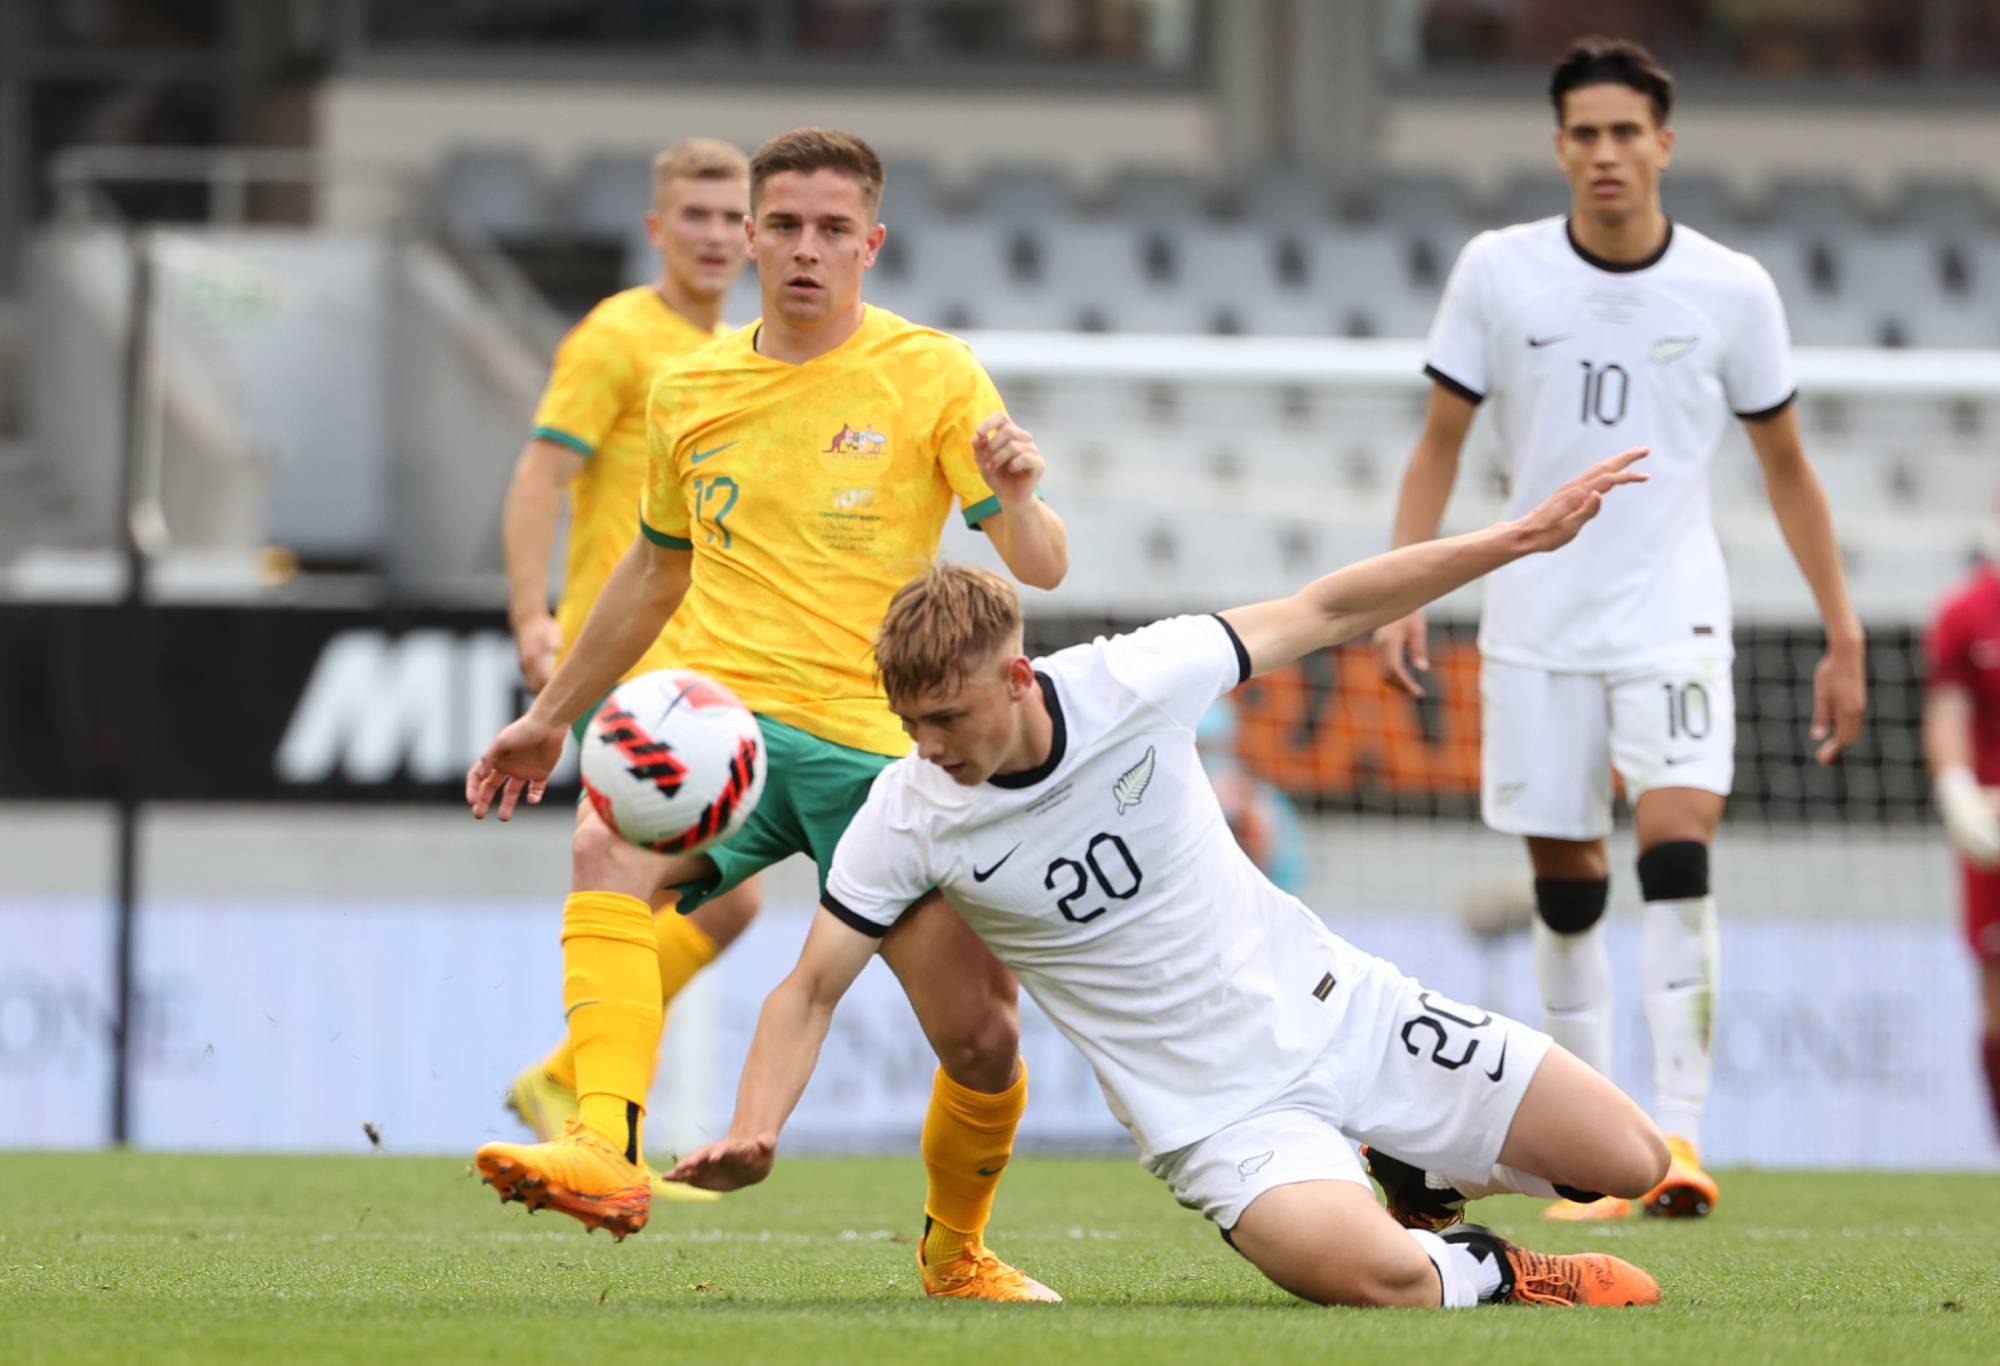 Cameron Devlin of Australia in action during the International friendly match between the New Zealand All Whites and Australia Socceroos at Eden Park on September 25, 2022 in Auckland, New Zealand. (Photo by Fiona Goodall/Getty Images)